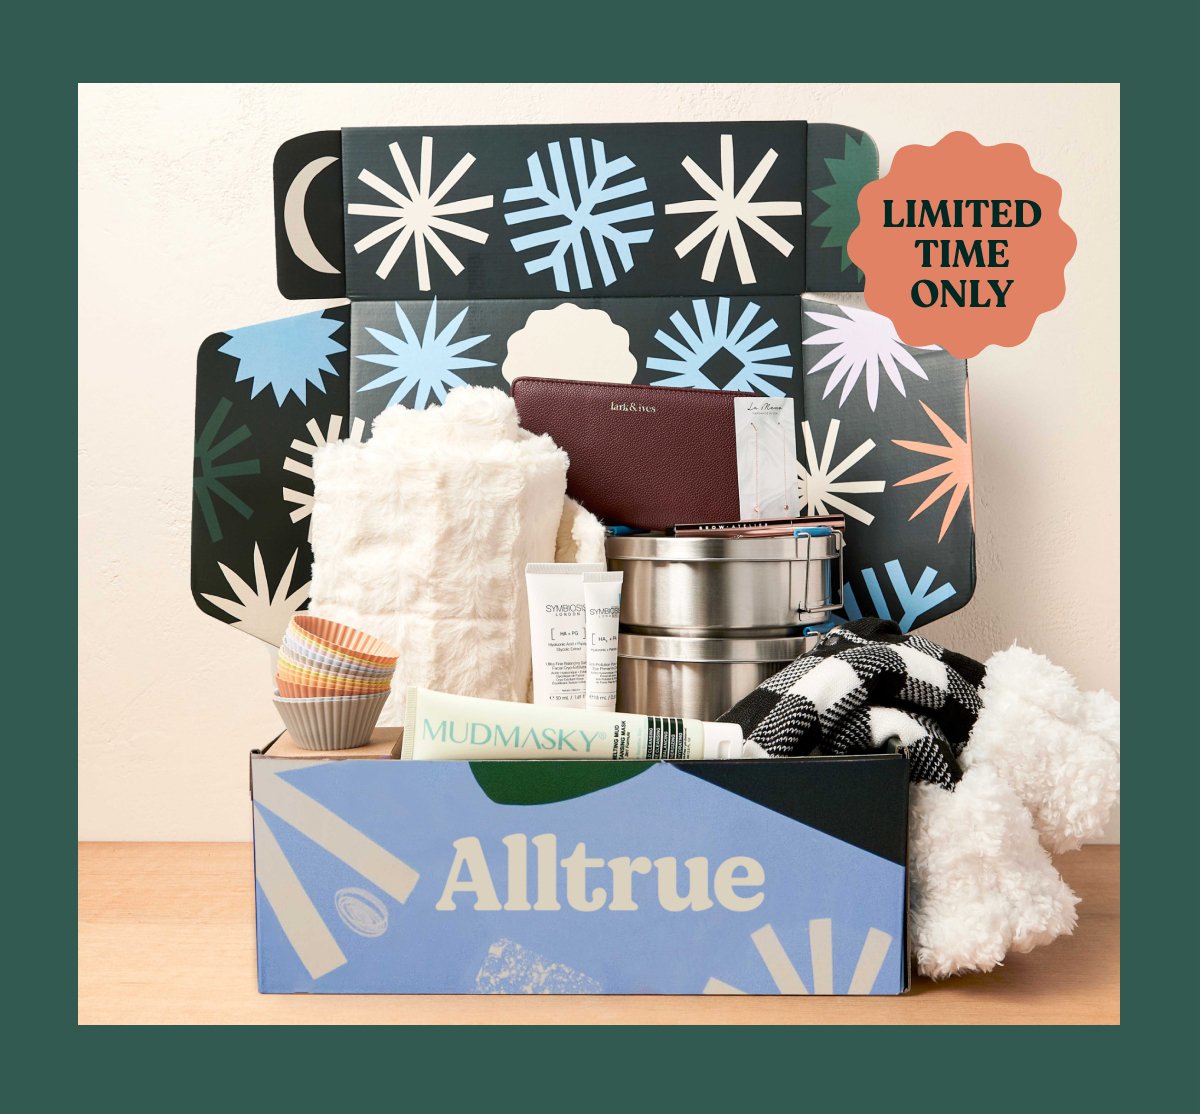 Alltrue Cyber Monday 2021 Coupon: Get 50% Off Your First Box